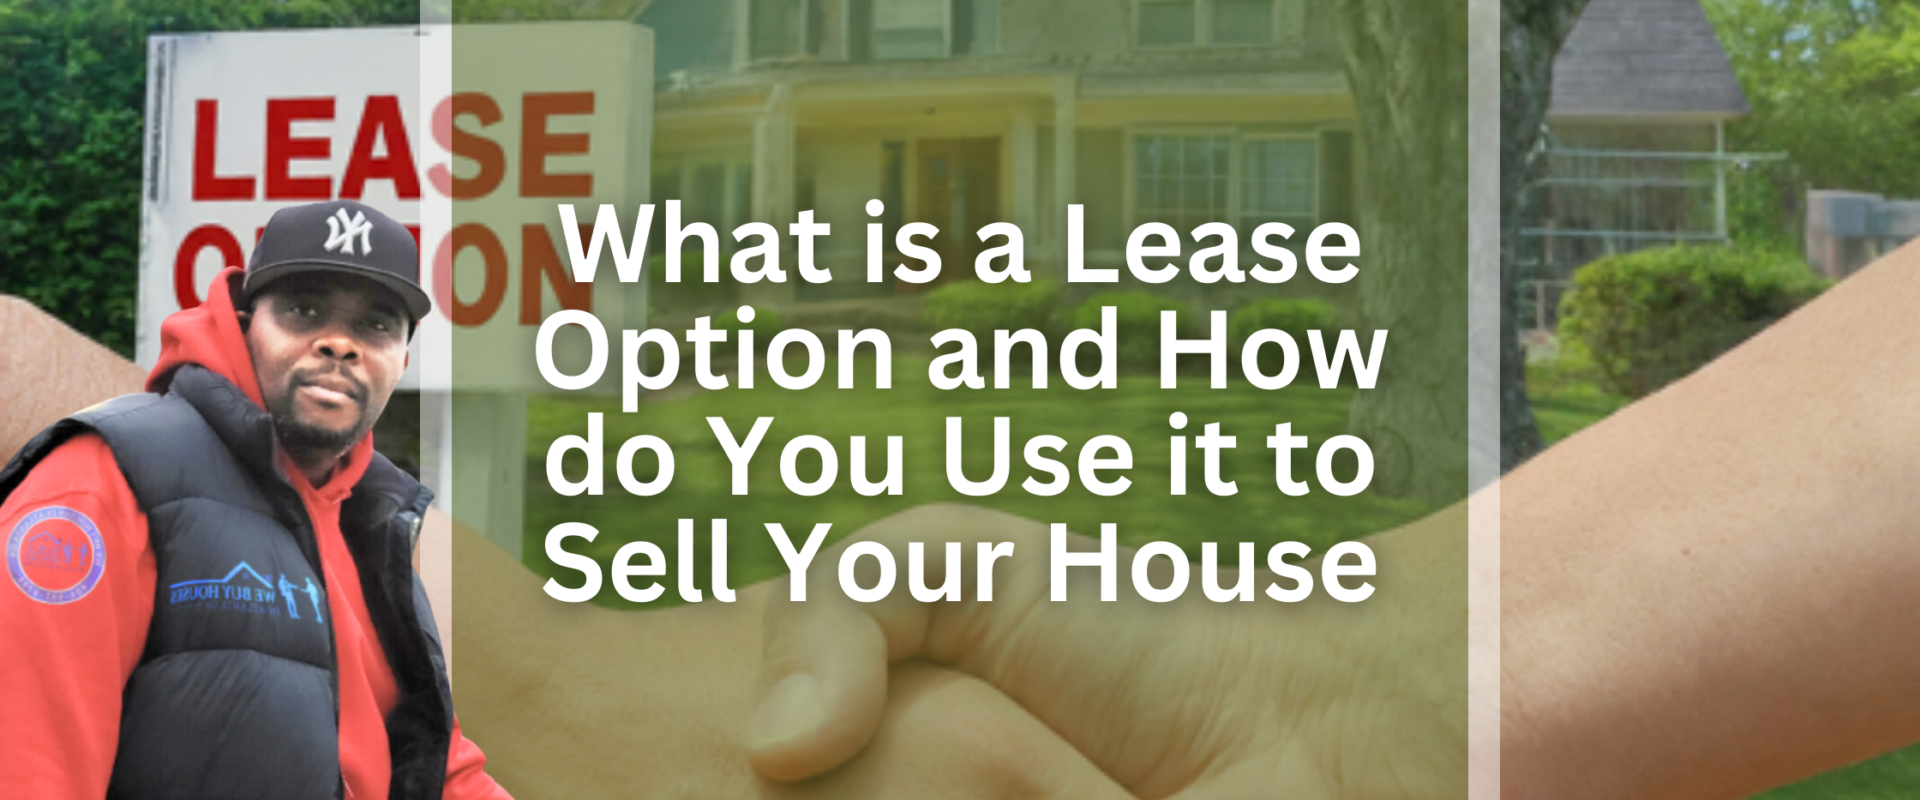 What is a Lease Option and How do You Use it to Sell Your House